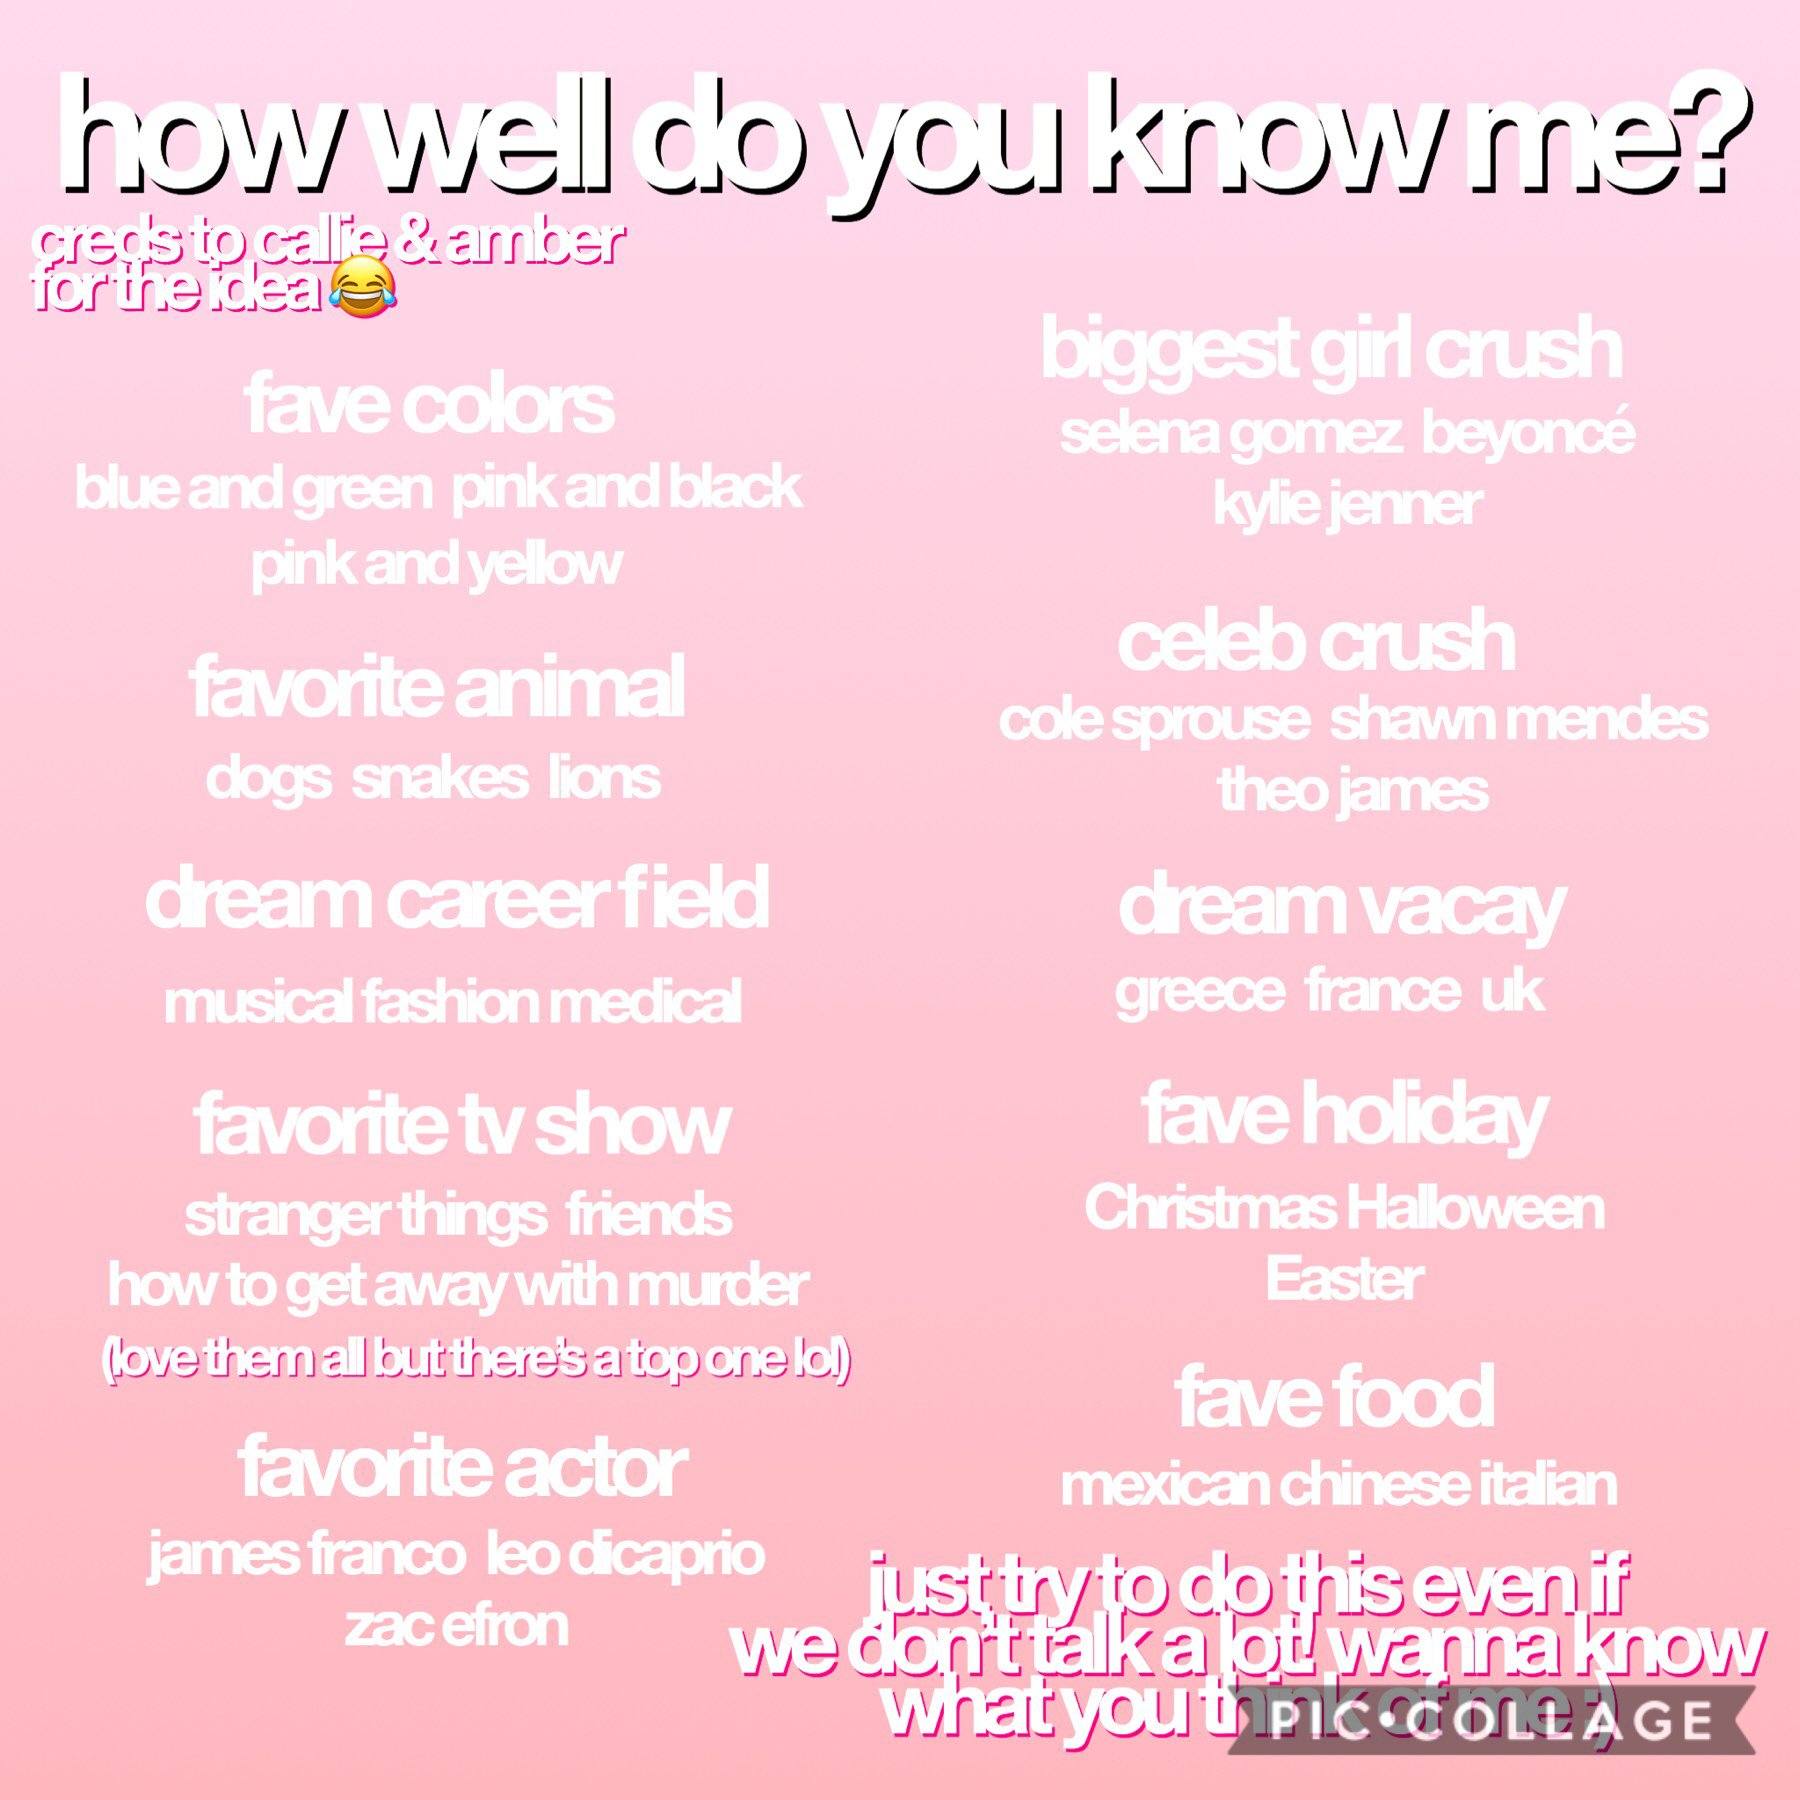 try to do this I’m curious 😂😂 credits to callie & amber !!